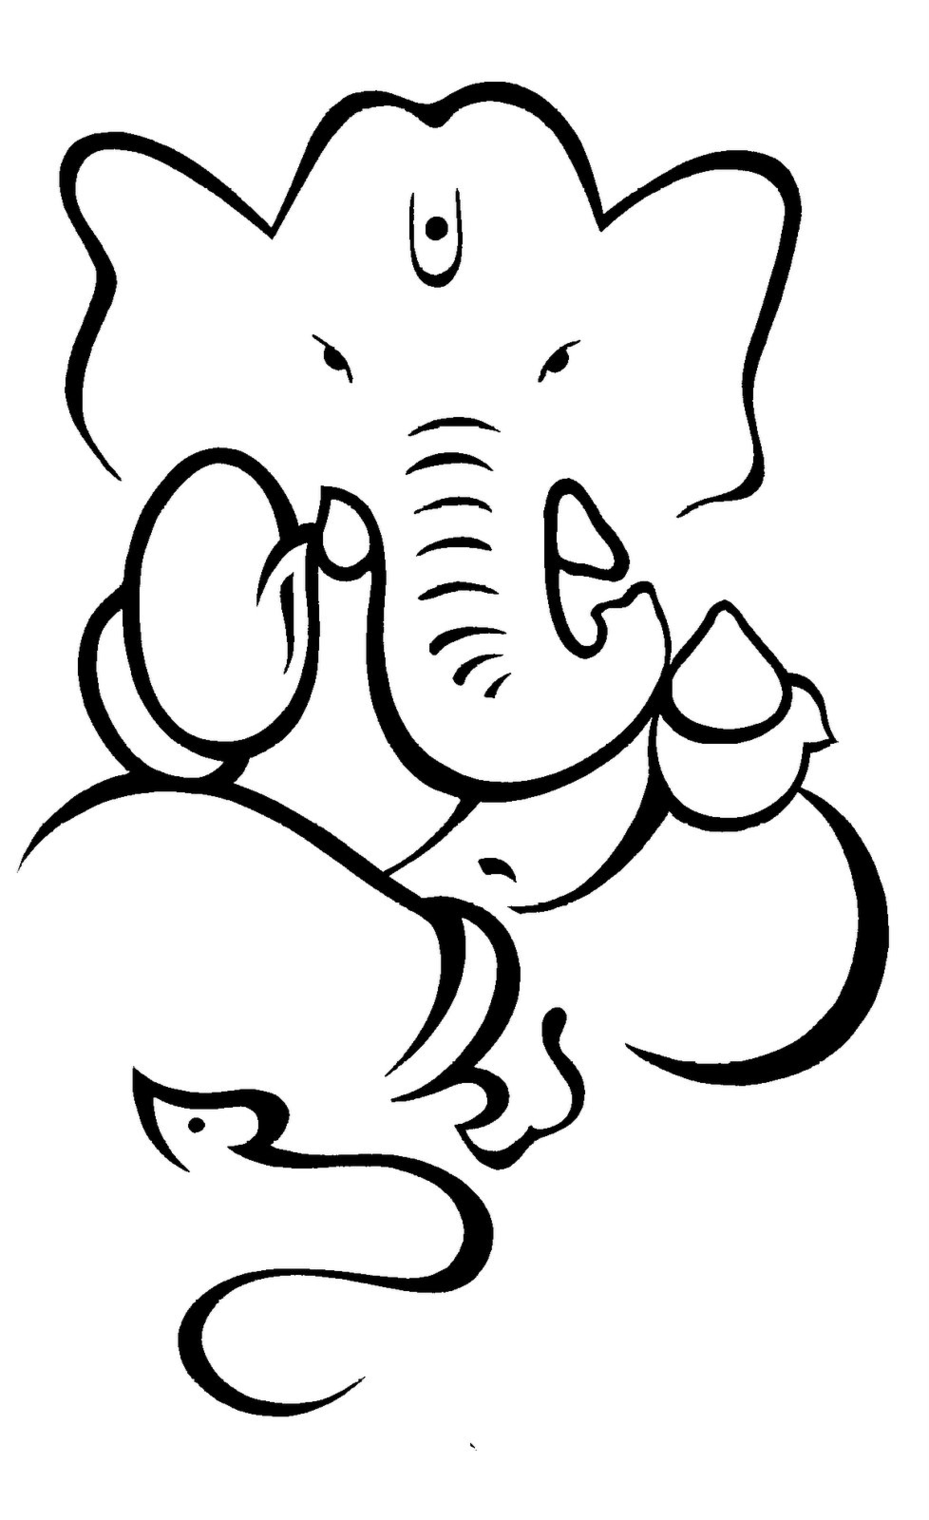 Outline Goddess Ganesh Clipart - Free to use Clip Art Resource